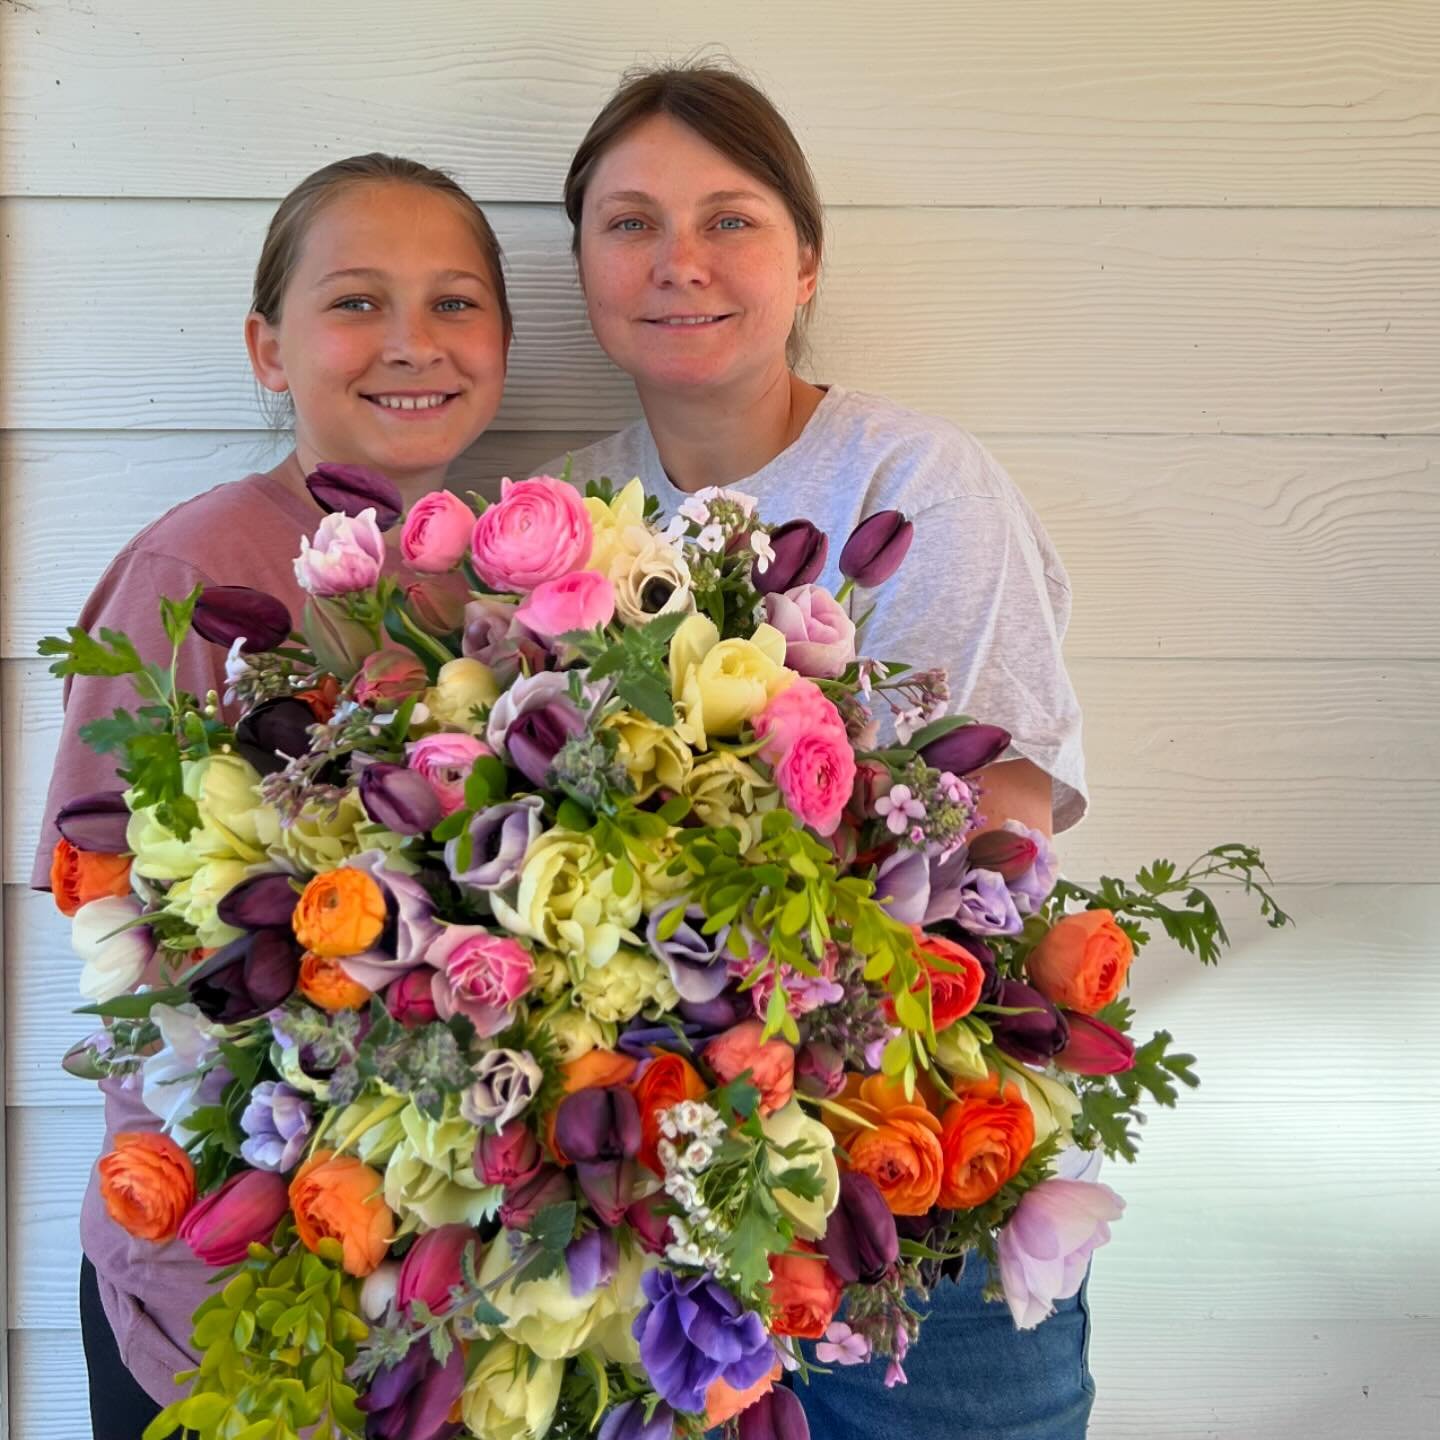 The flower shed is open! Come visit us to grab a Mother&rsquo;s Day bouquet! 

#mother&rsquo;sdayflowers #springbouquet #farmflowers  #mothersday #mothersdayflowers #mothersdaygift #mothersday2022 #pnwtulips #tulipseason #tulips #tulipfarm #weddingfl